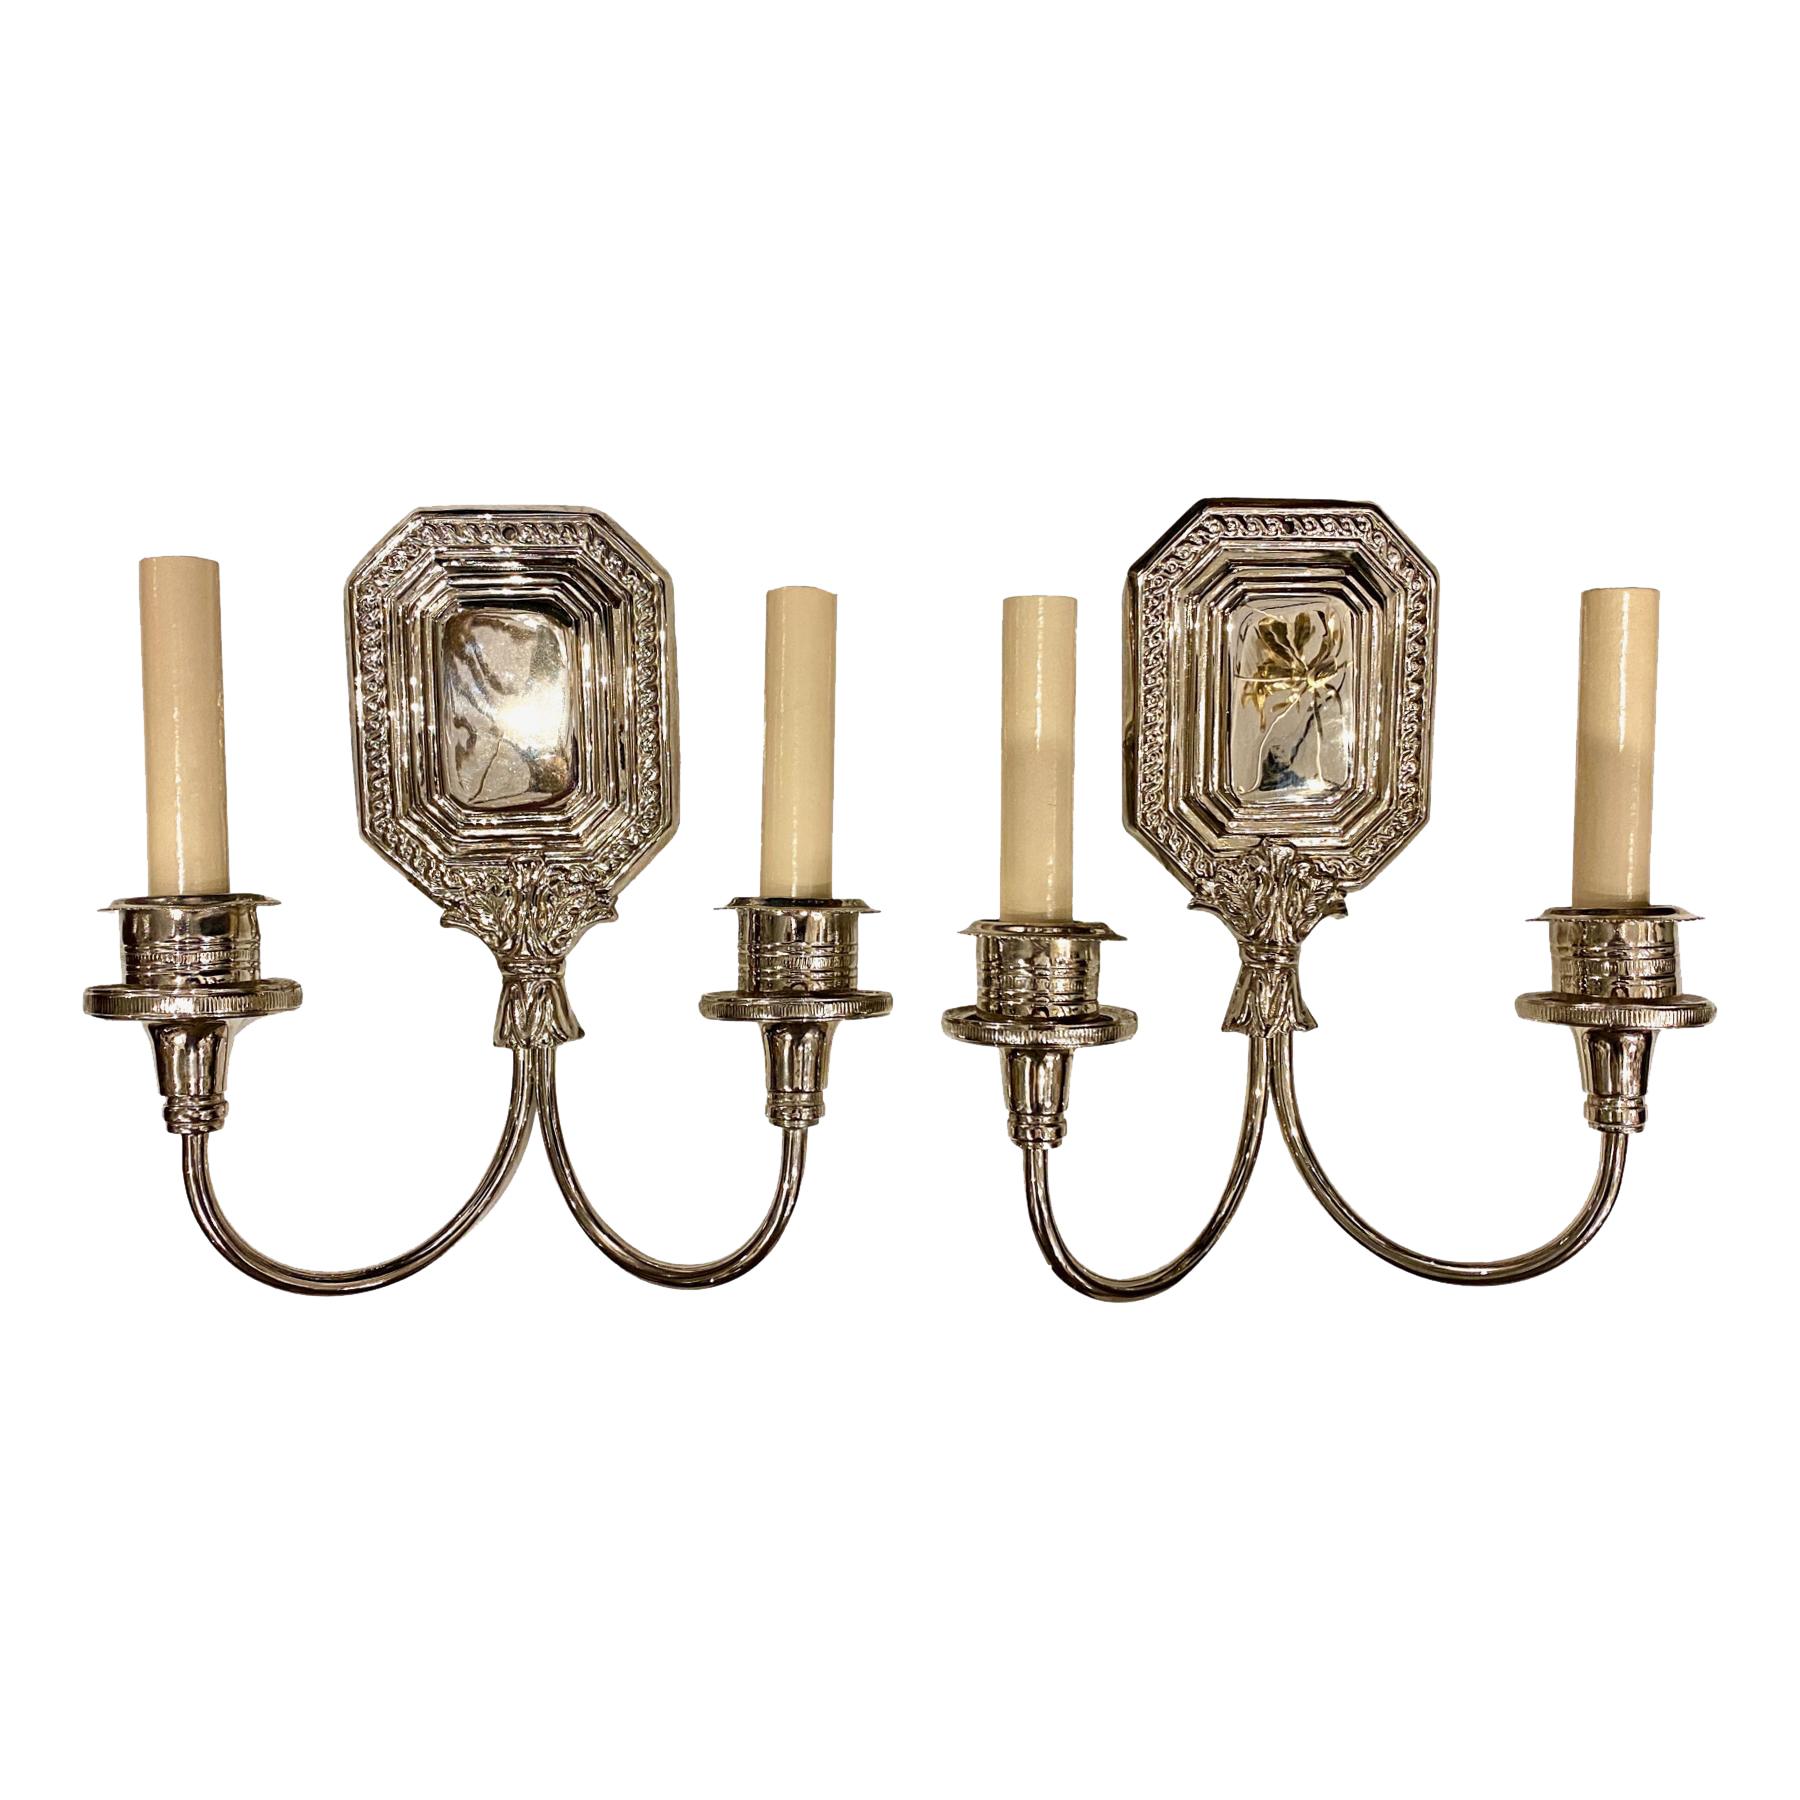 Pair of English Nickel-Plated Sconces